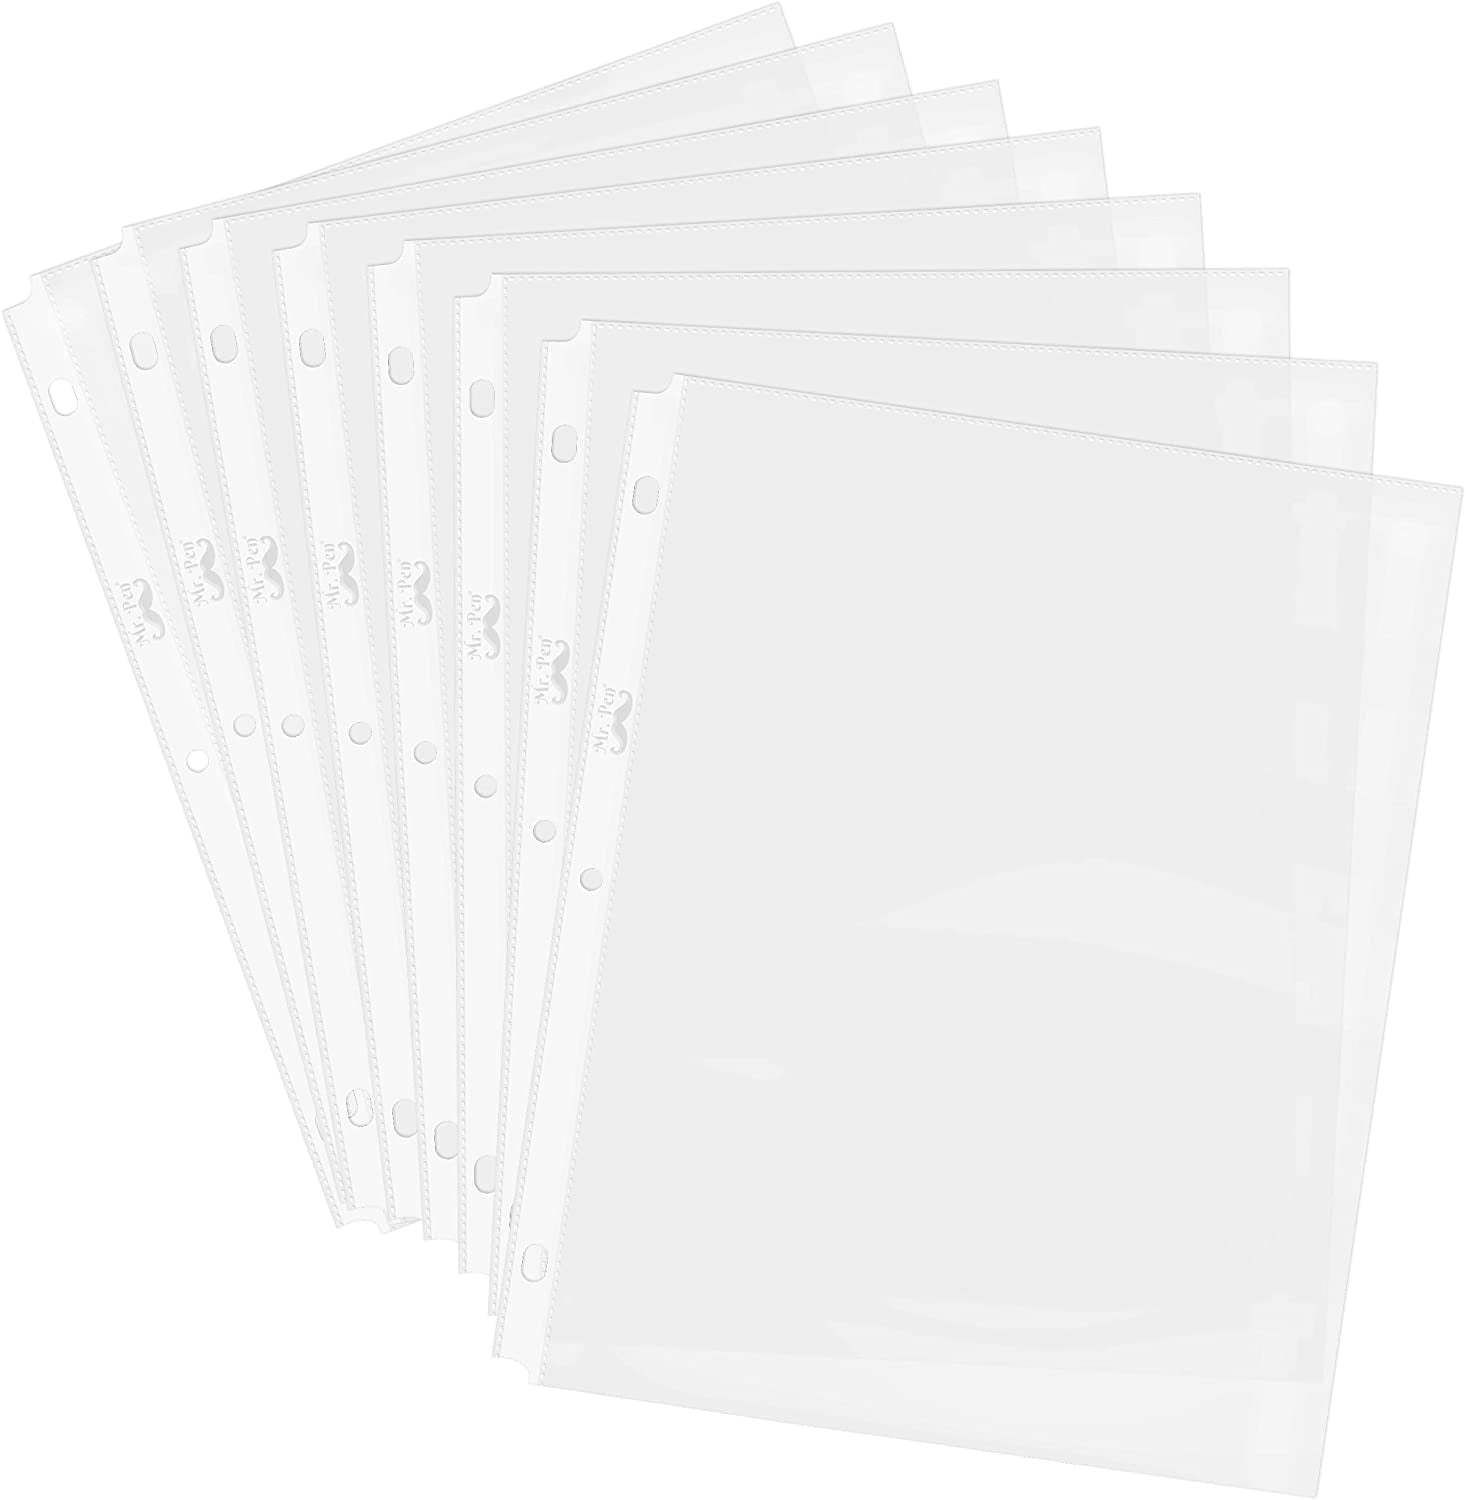 1000 Pcs Clear Plastic Sheet Page Protectors Office Document Sleeves Non Glare 